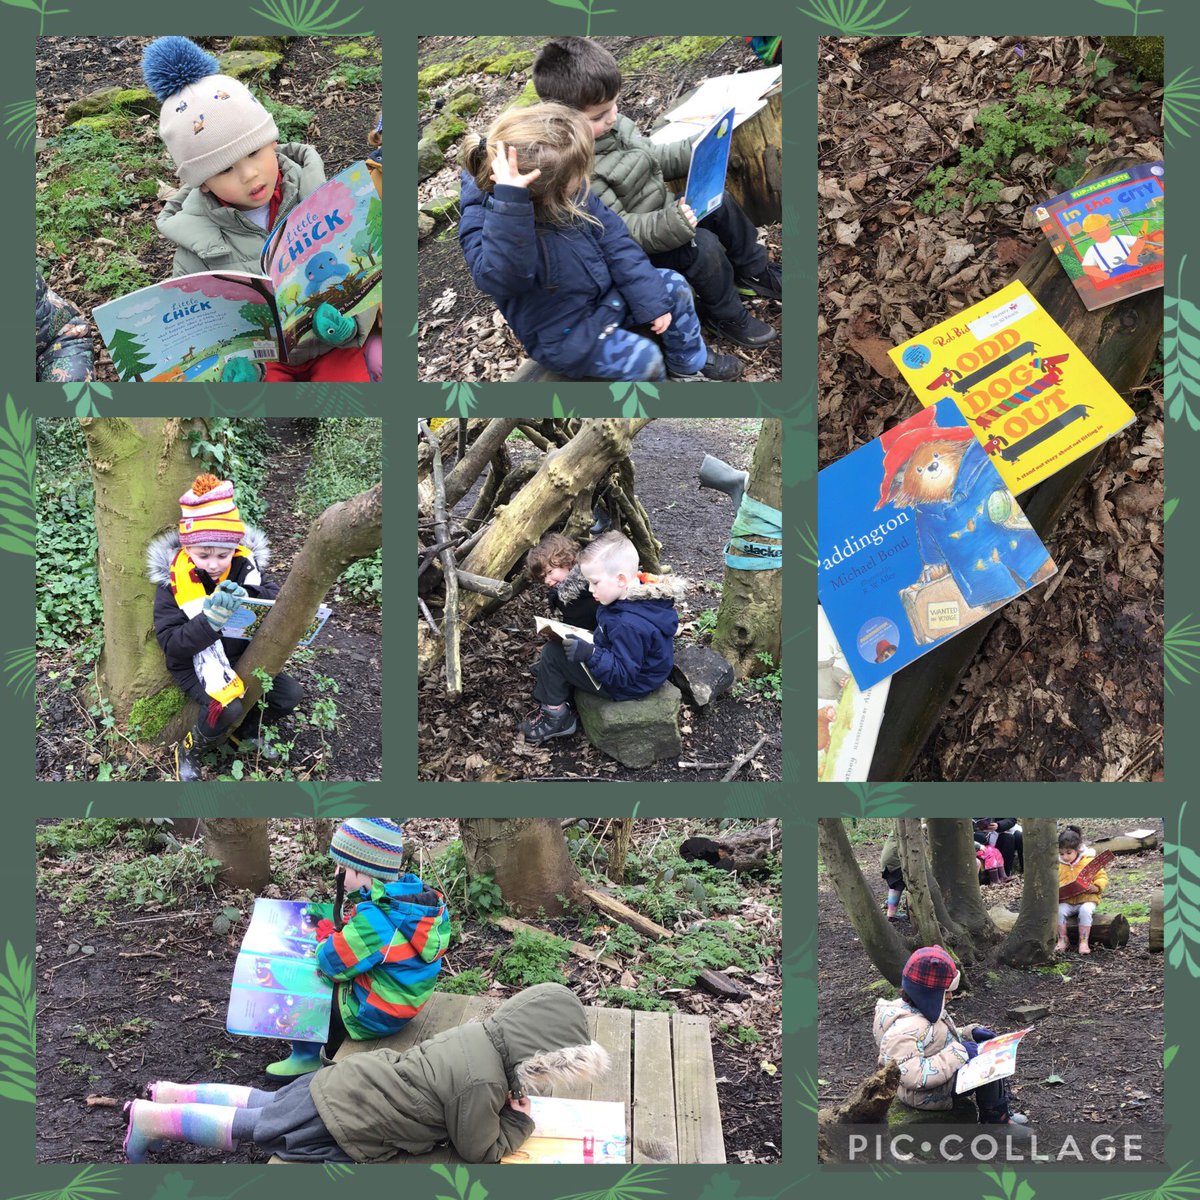 We also enjoyed finding a cosy corner in #forestschool for spot of outdoor reading! We particularly enjoyed sharing books with our friends 😀 @BfdForestSchls @JigsawPSHE #EYFS #readingforpleasure #TeamGG